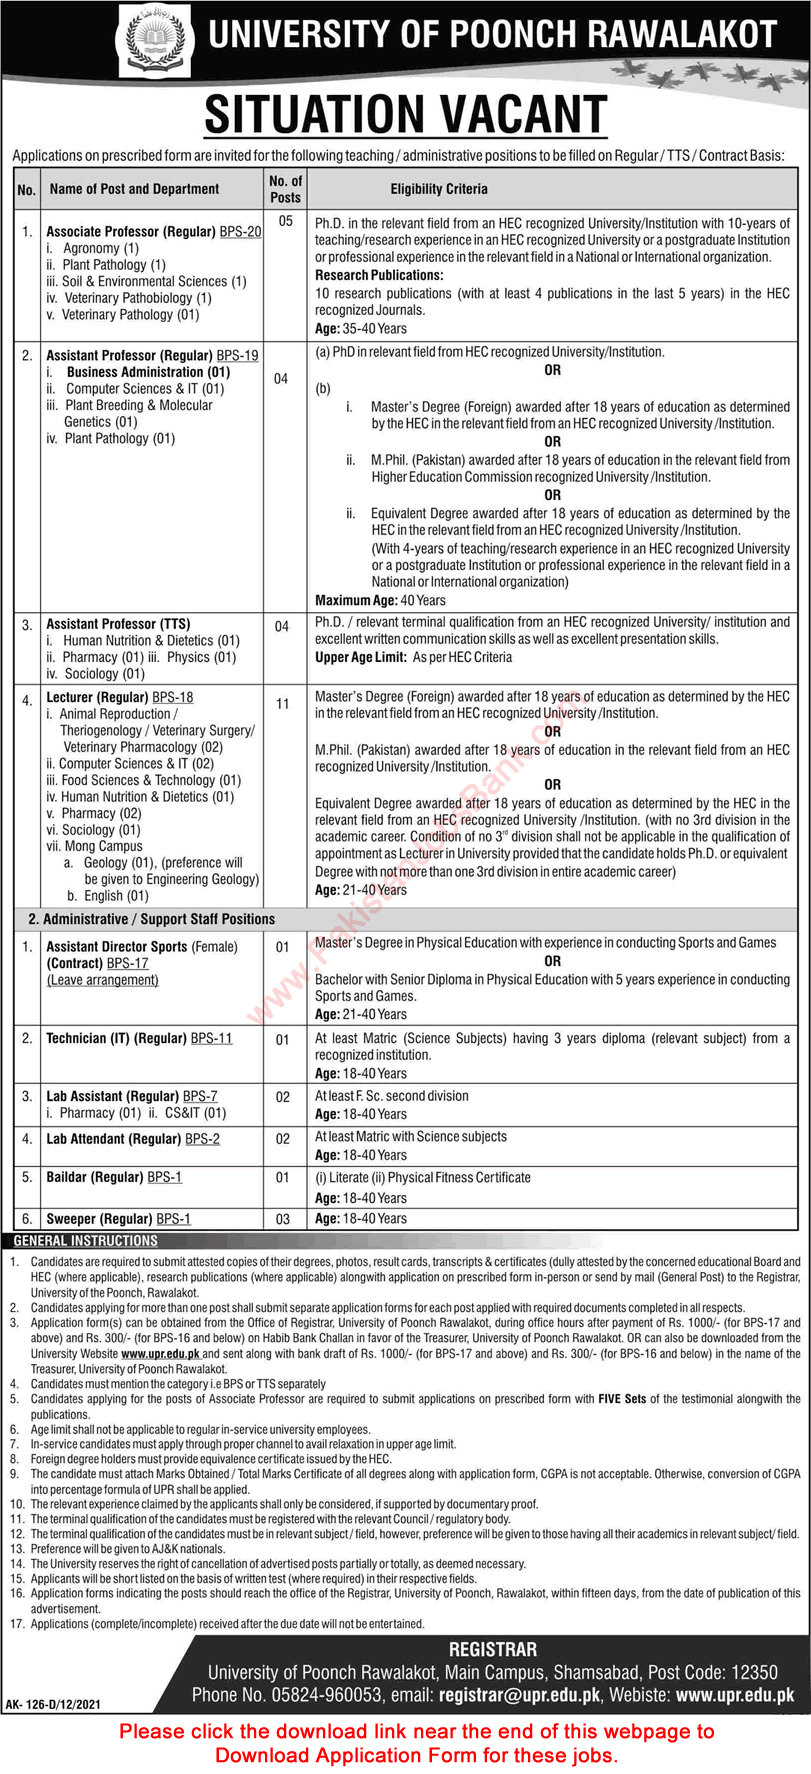 University of Poonch Rawalakot Jobs December 2021 Application Form Teaching Faculty & Others Latest